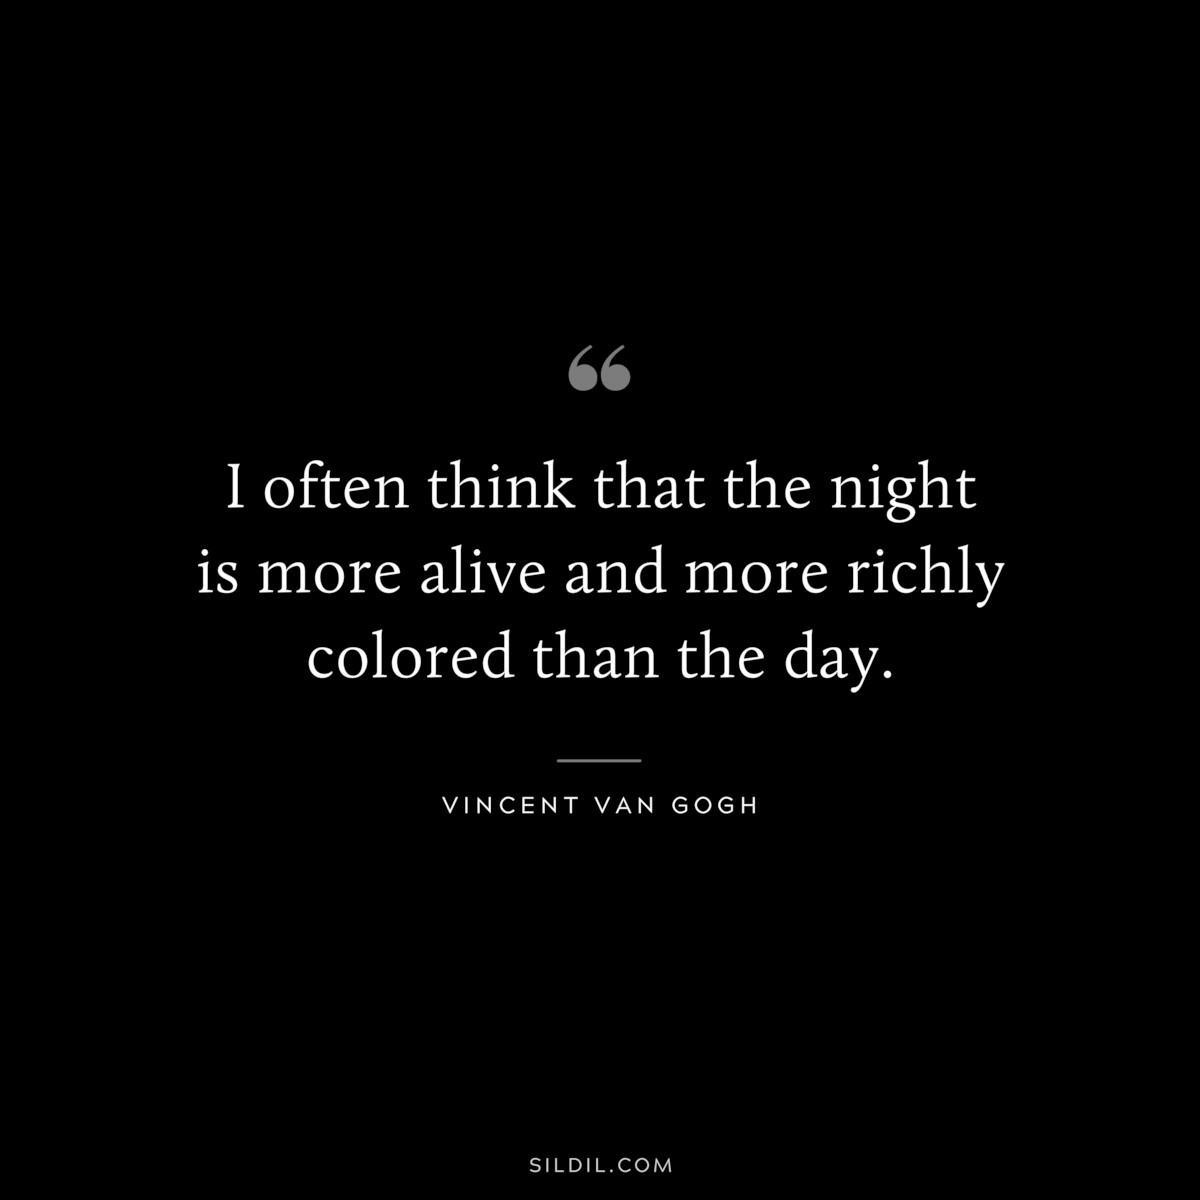 I often think that the night is more alive and more richly colored than the day. ― Vincent van Gogh